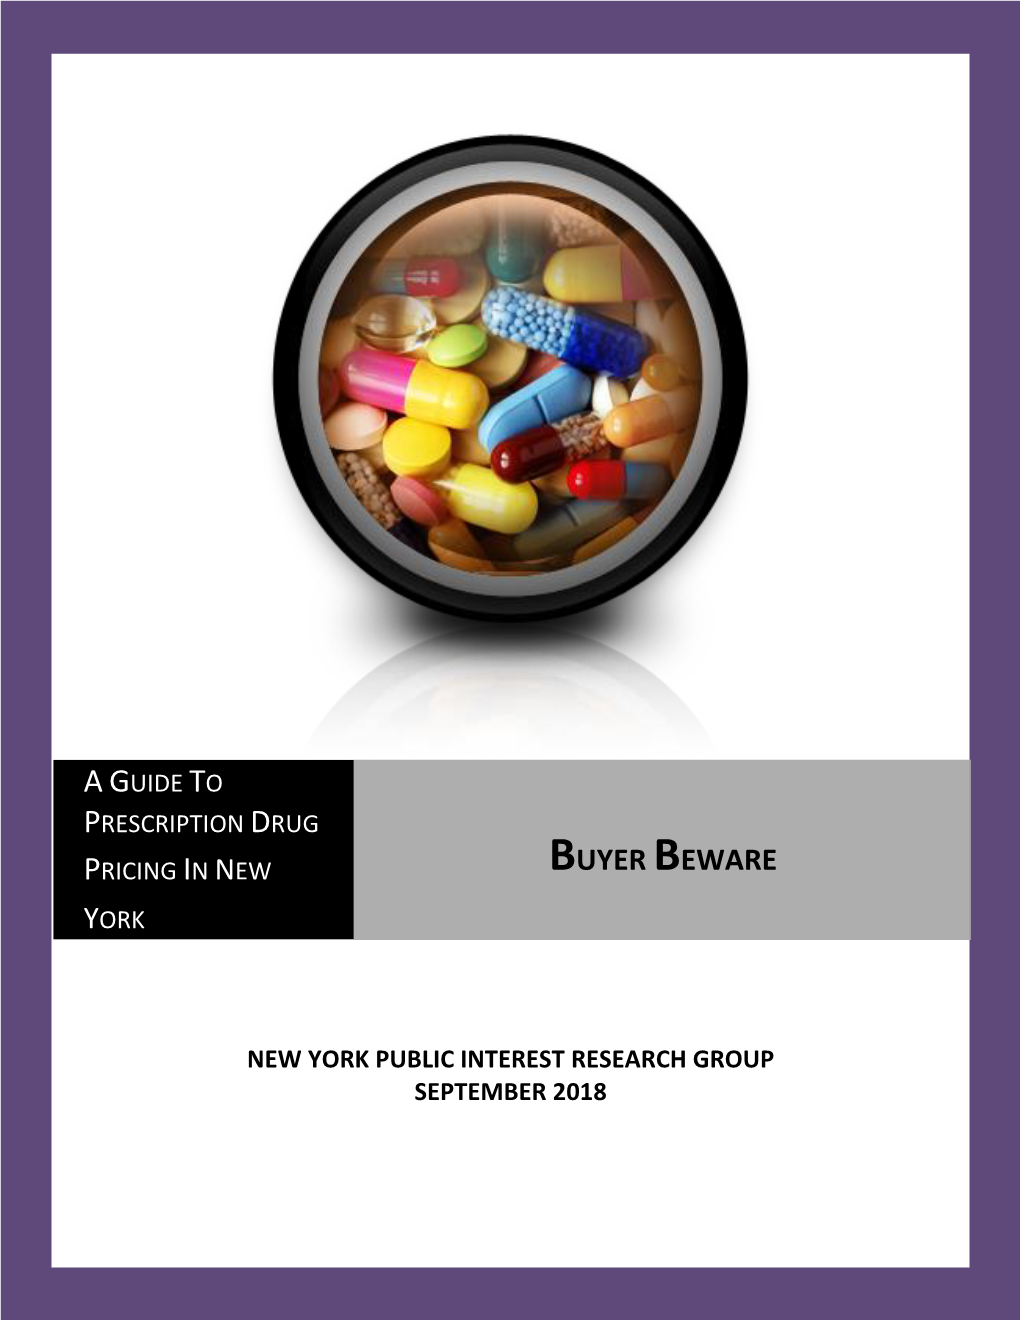 A Guide to Prescription Drug Pricing in New York